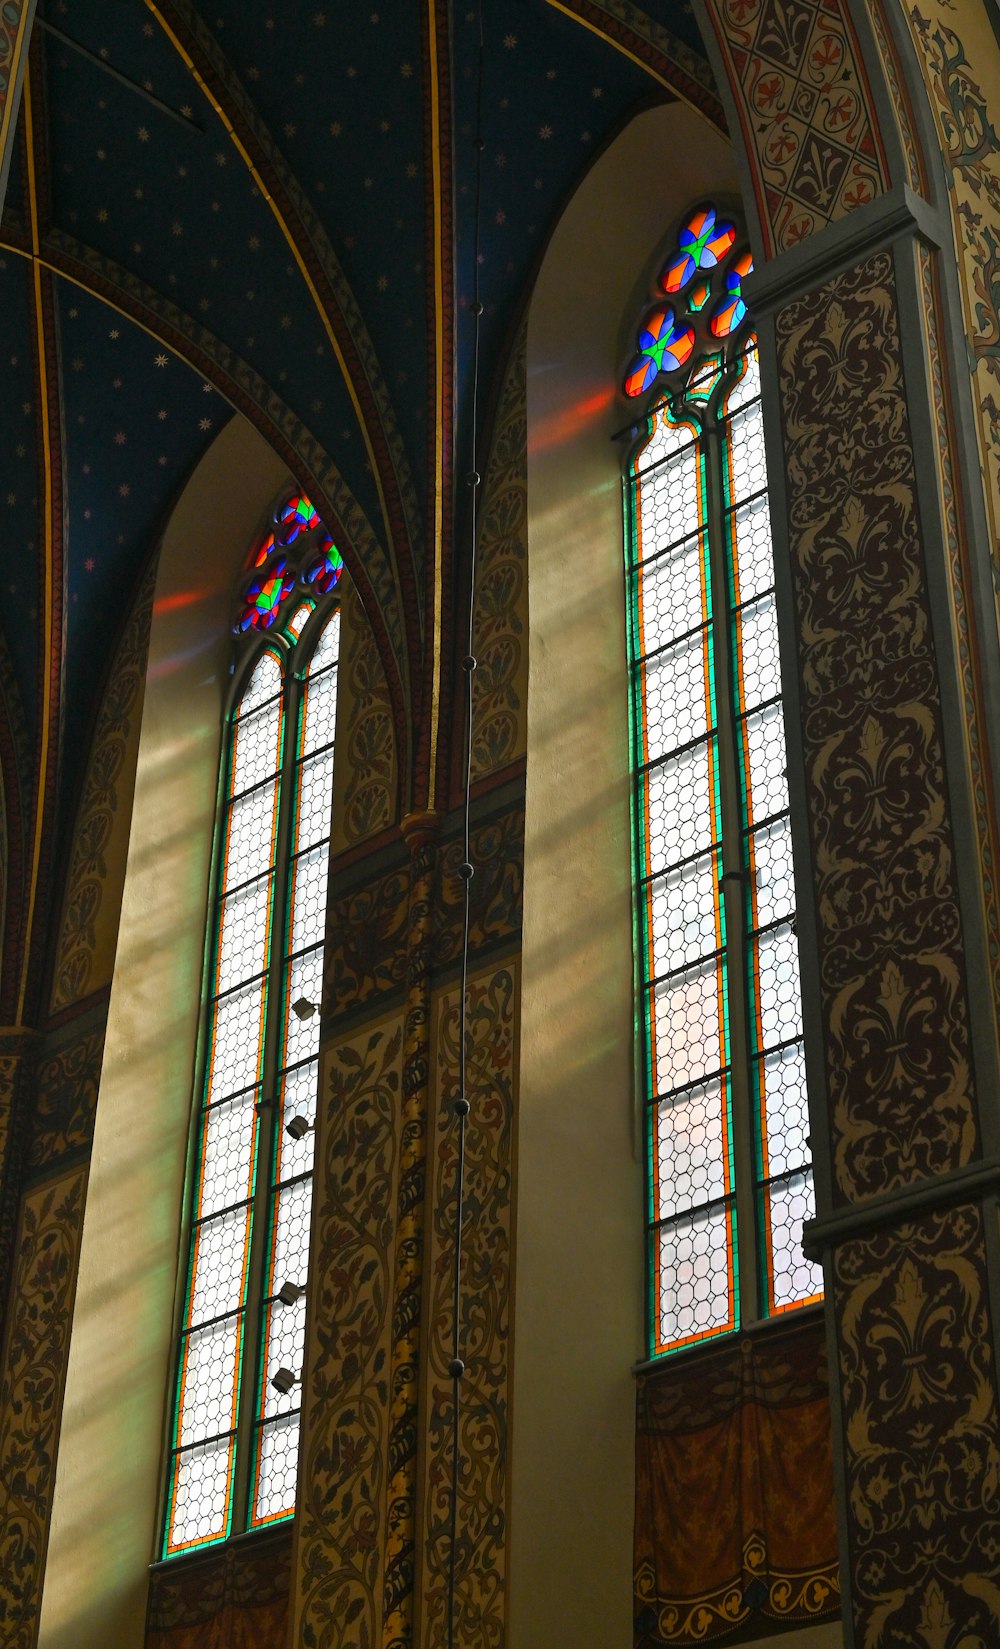 two large stained glass windows in a building